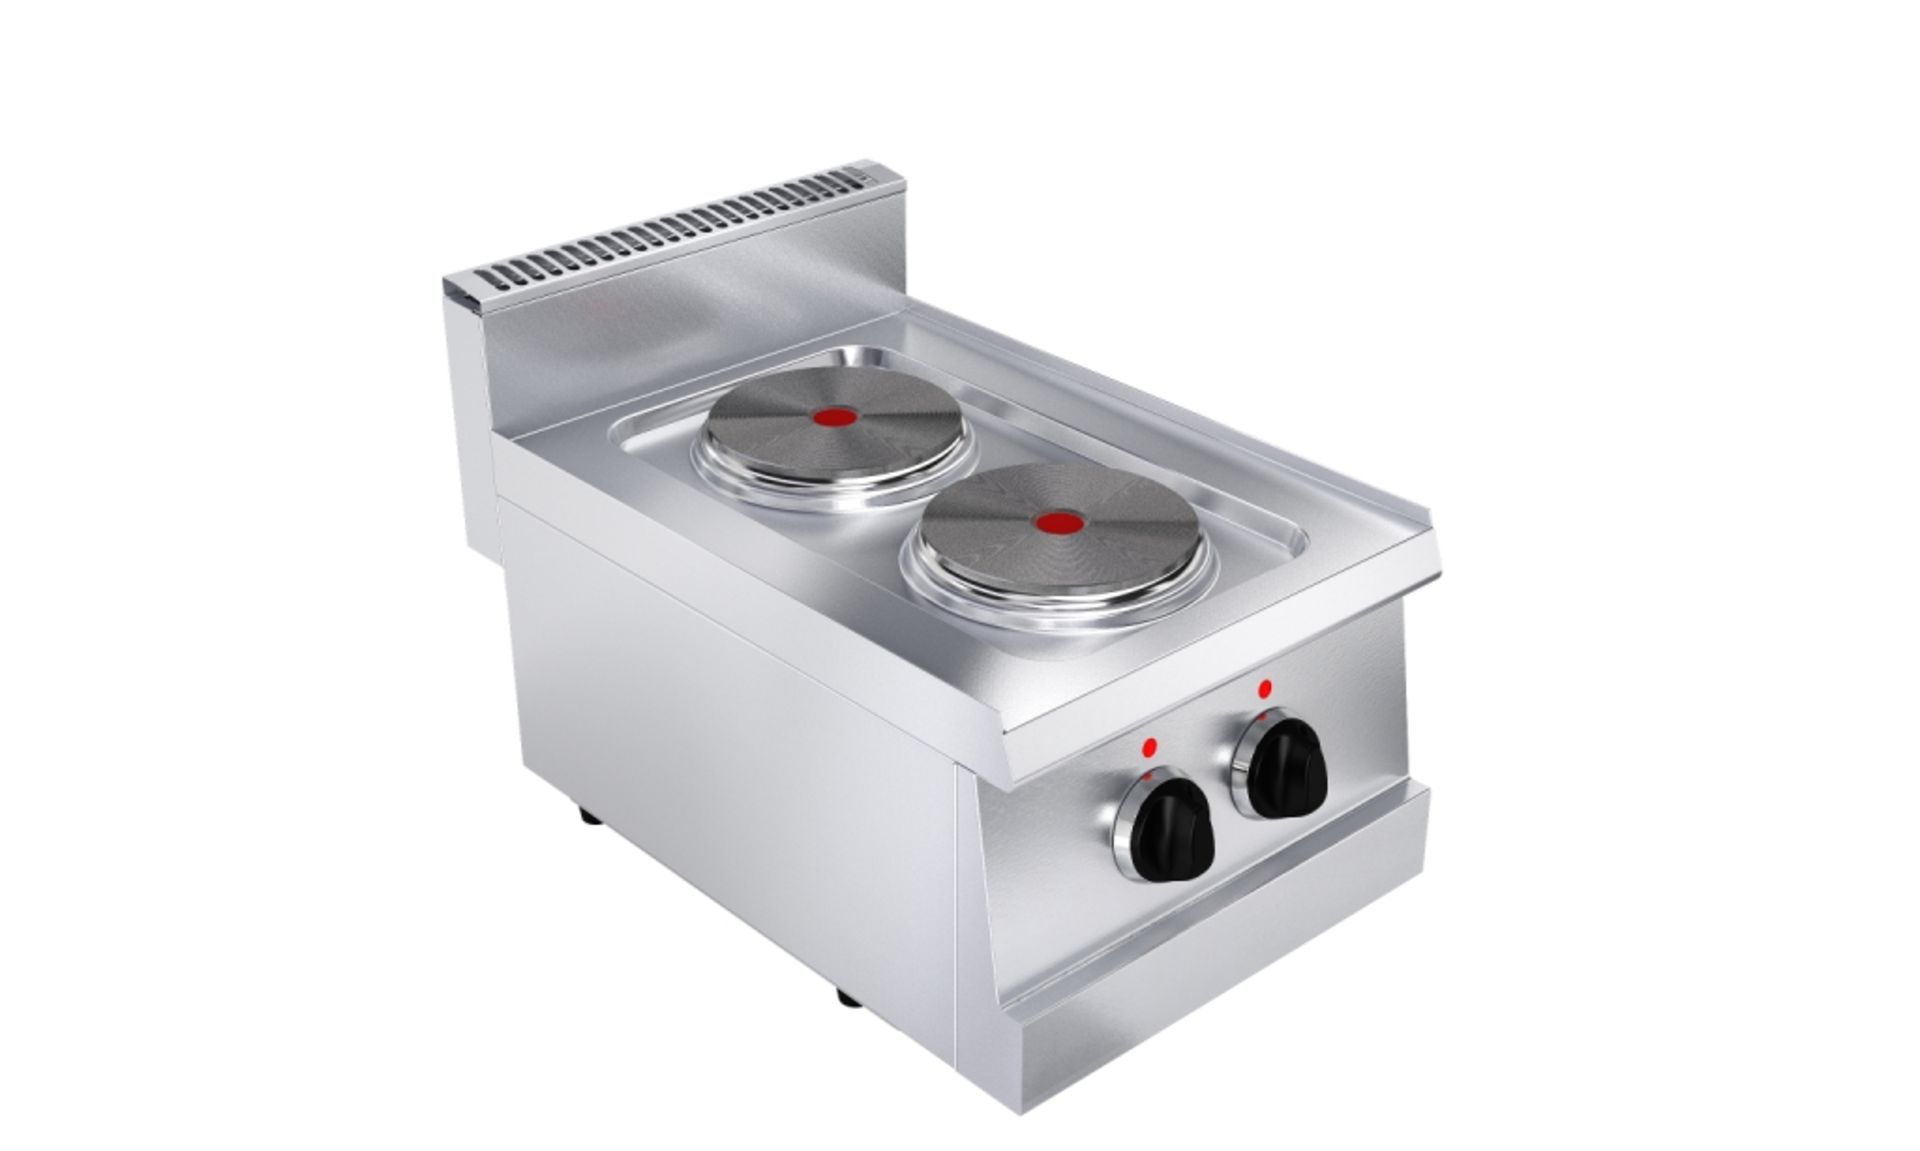 Rexmartins Model G6K100E Electric Range Cooker with 2 Burners, 2 x 1.5KW, 400mm W, New & B